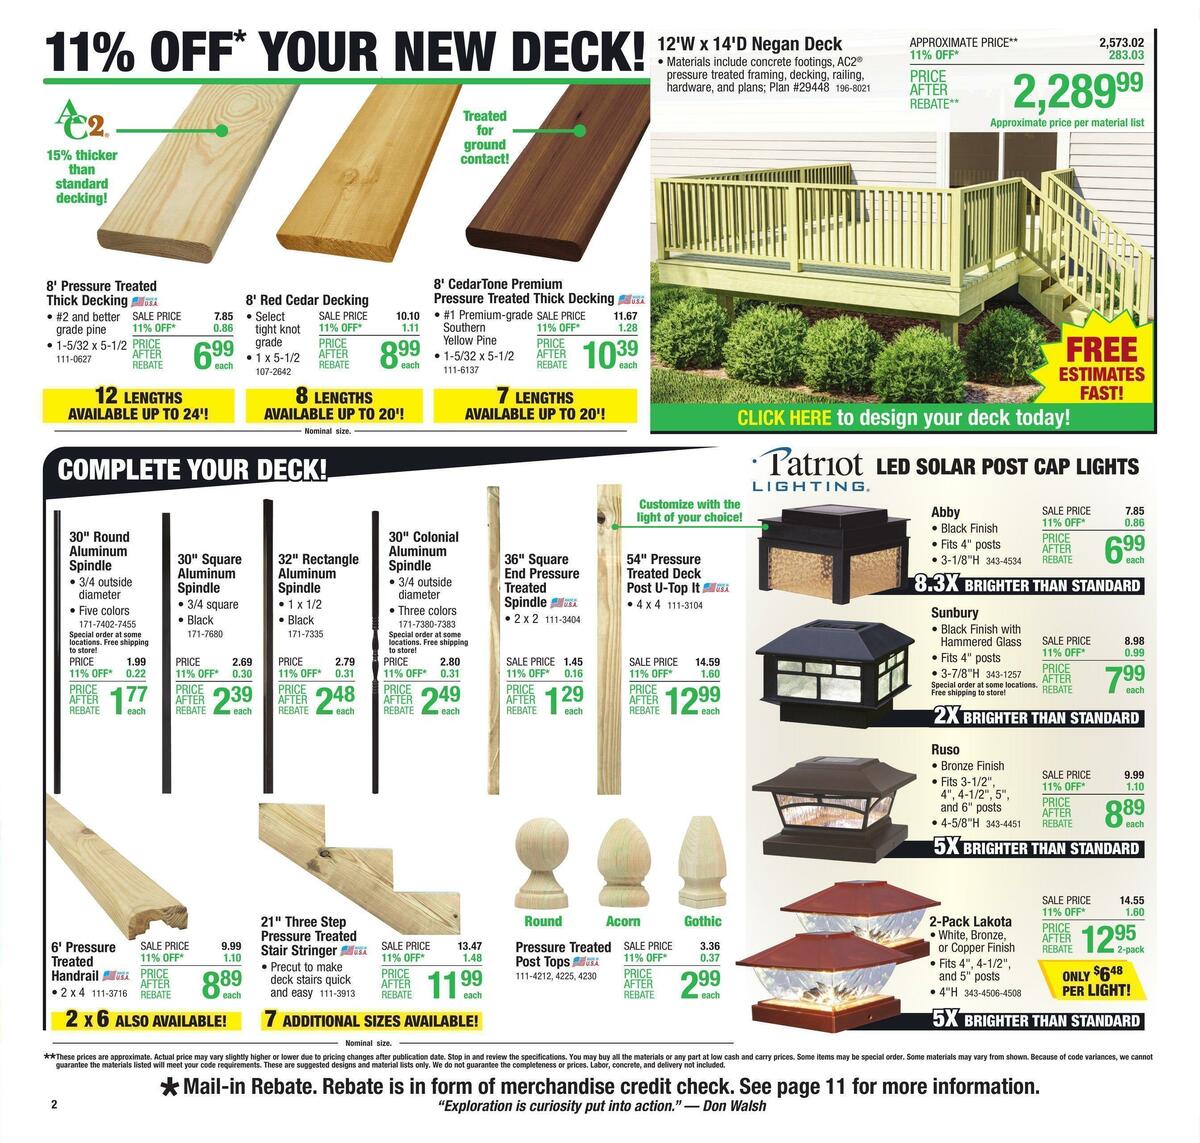 Menards Weekly Ad from March 9